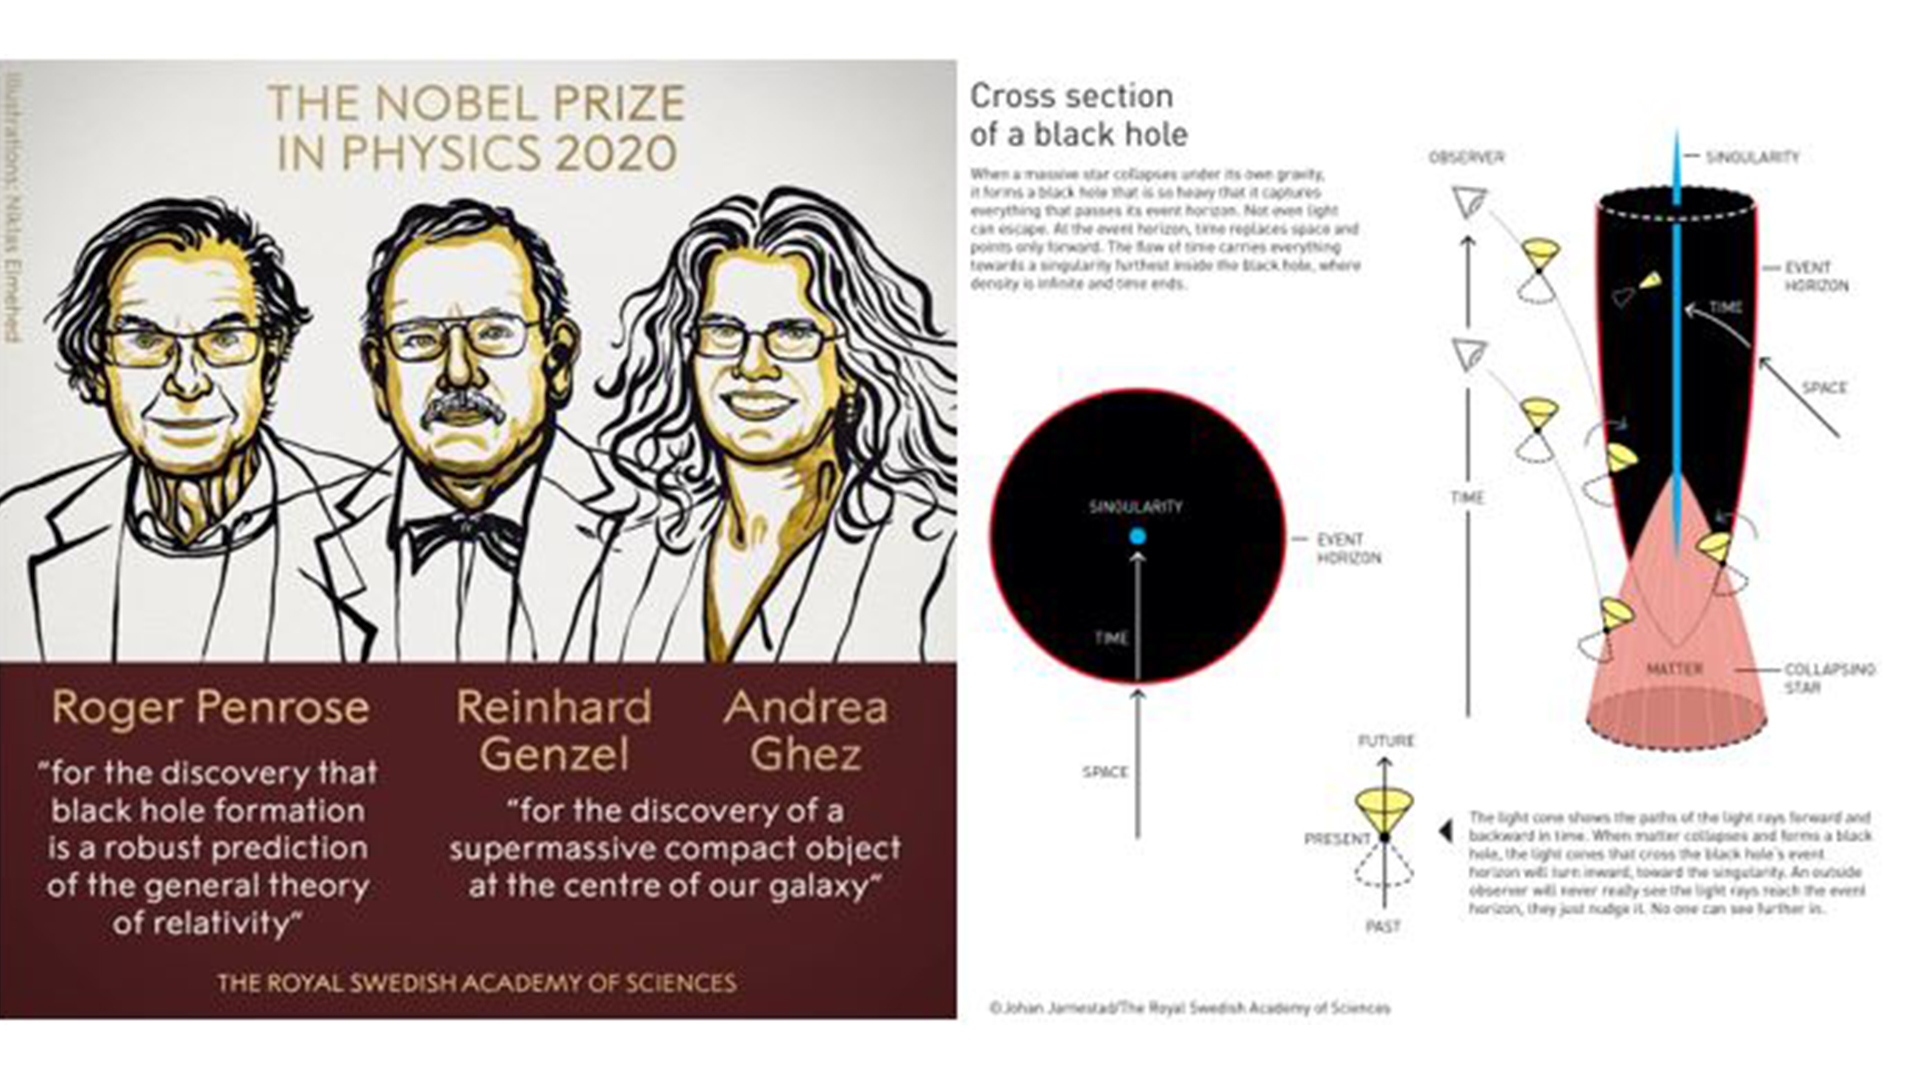 Three Scientists Awarded the 2020 Nobel Prize for Study Related to the Black Hole